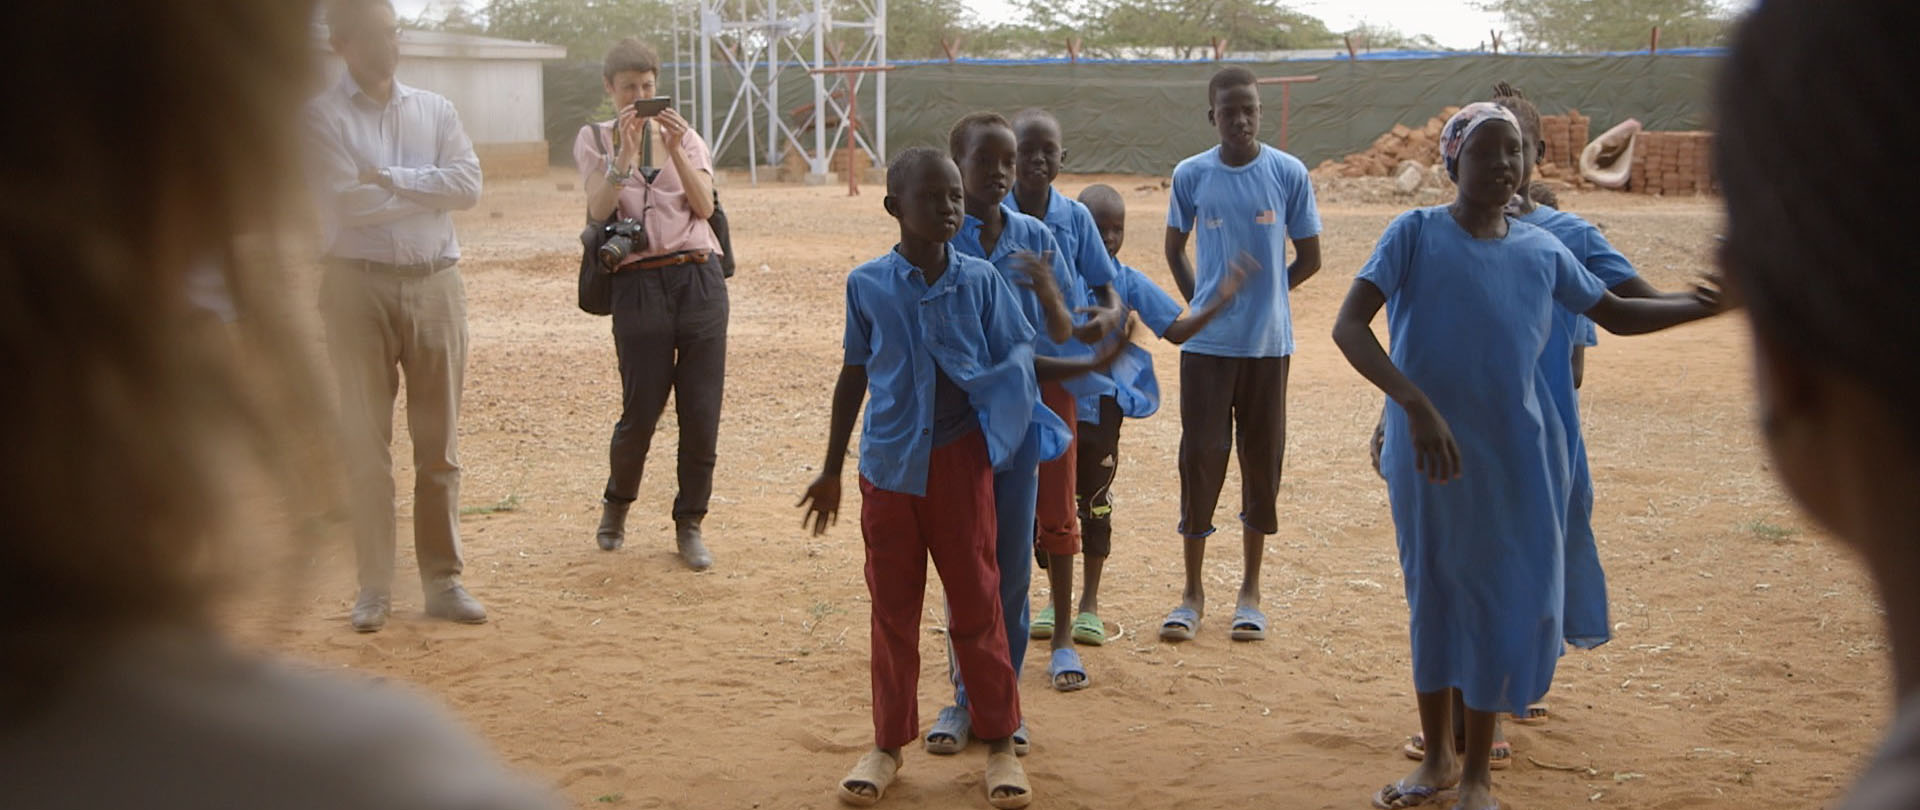 In Dadaab, the world’s largest camp, schoolchildren perform a dance for a visiting Swedish dignitary. 